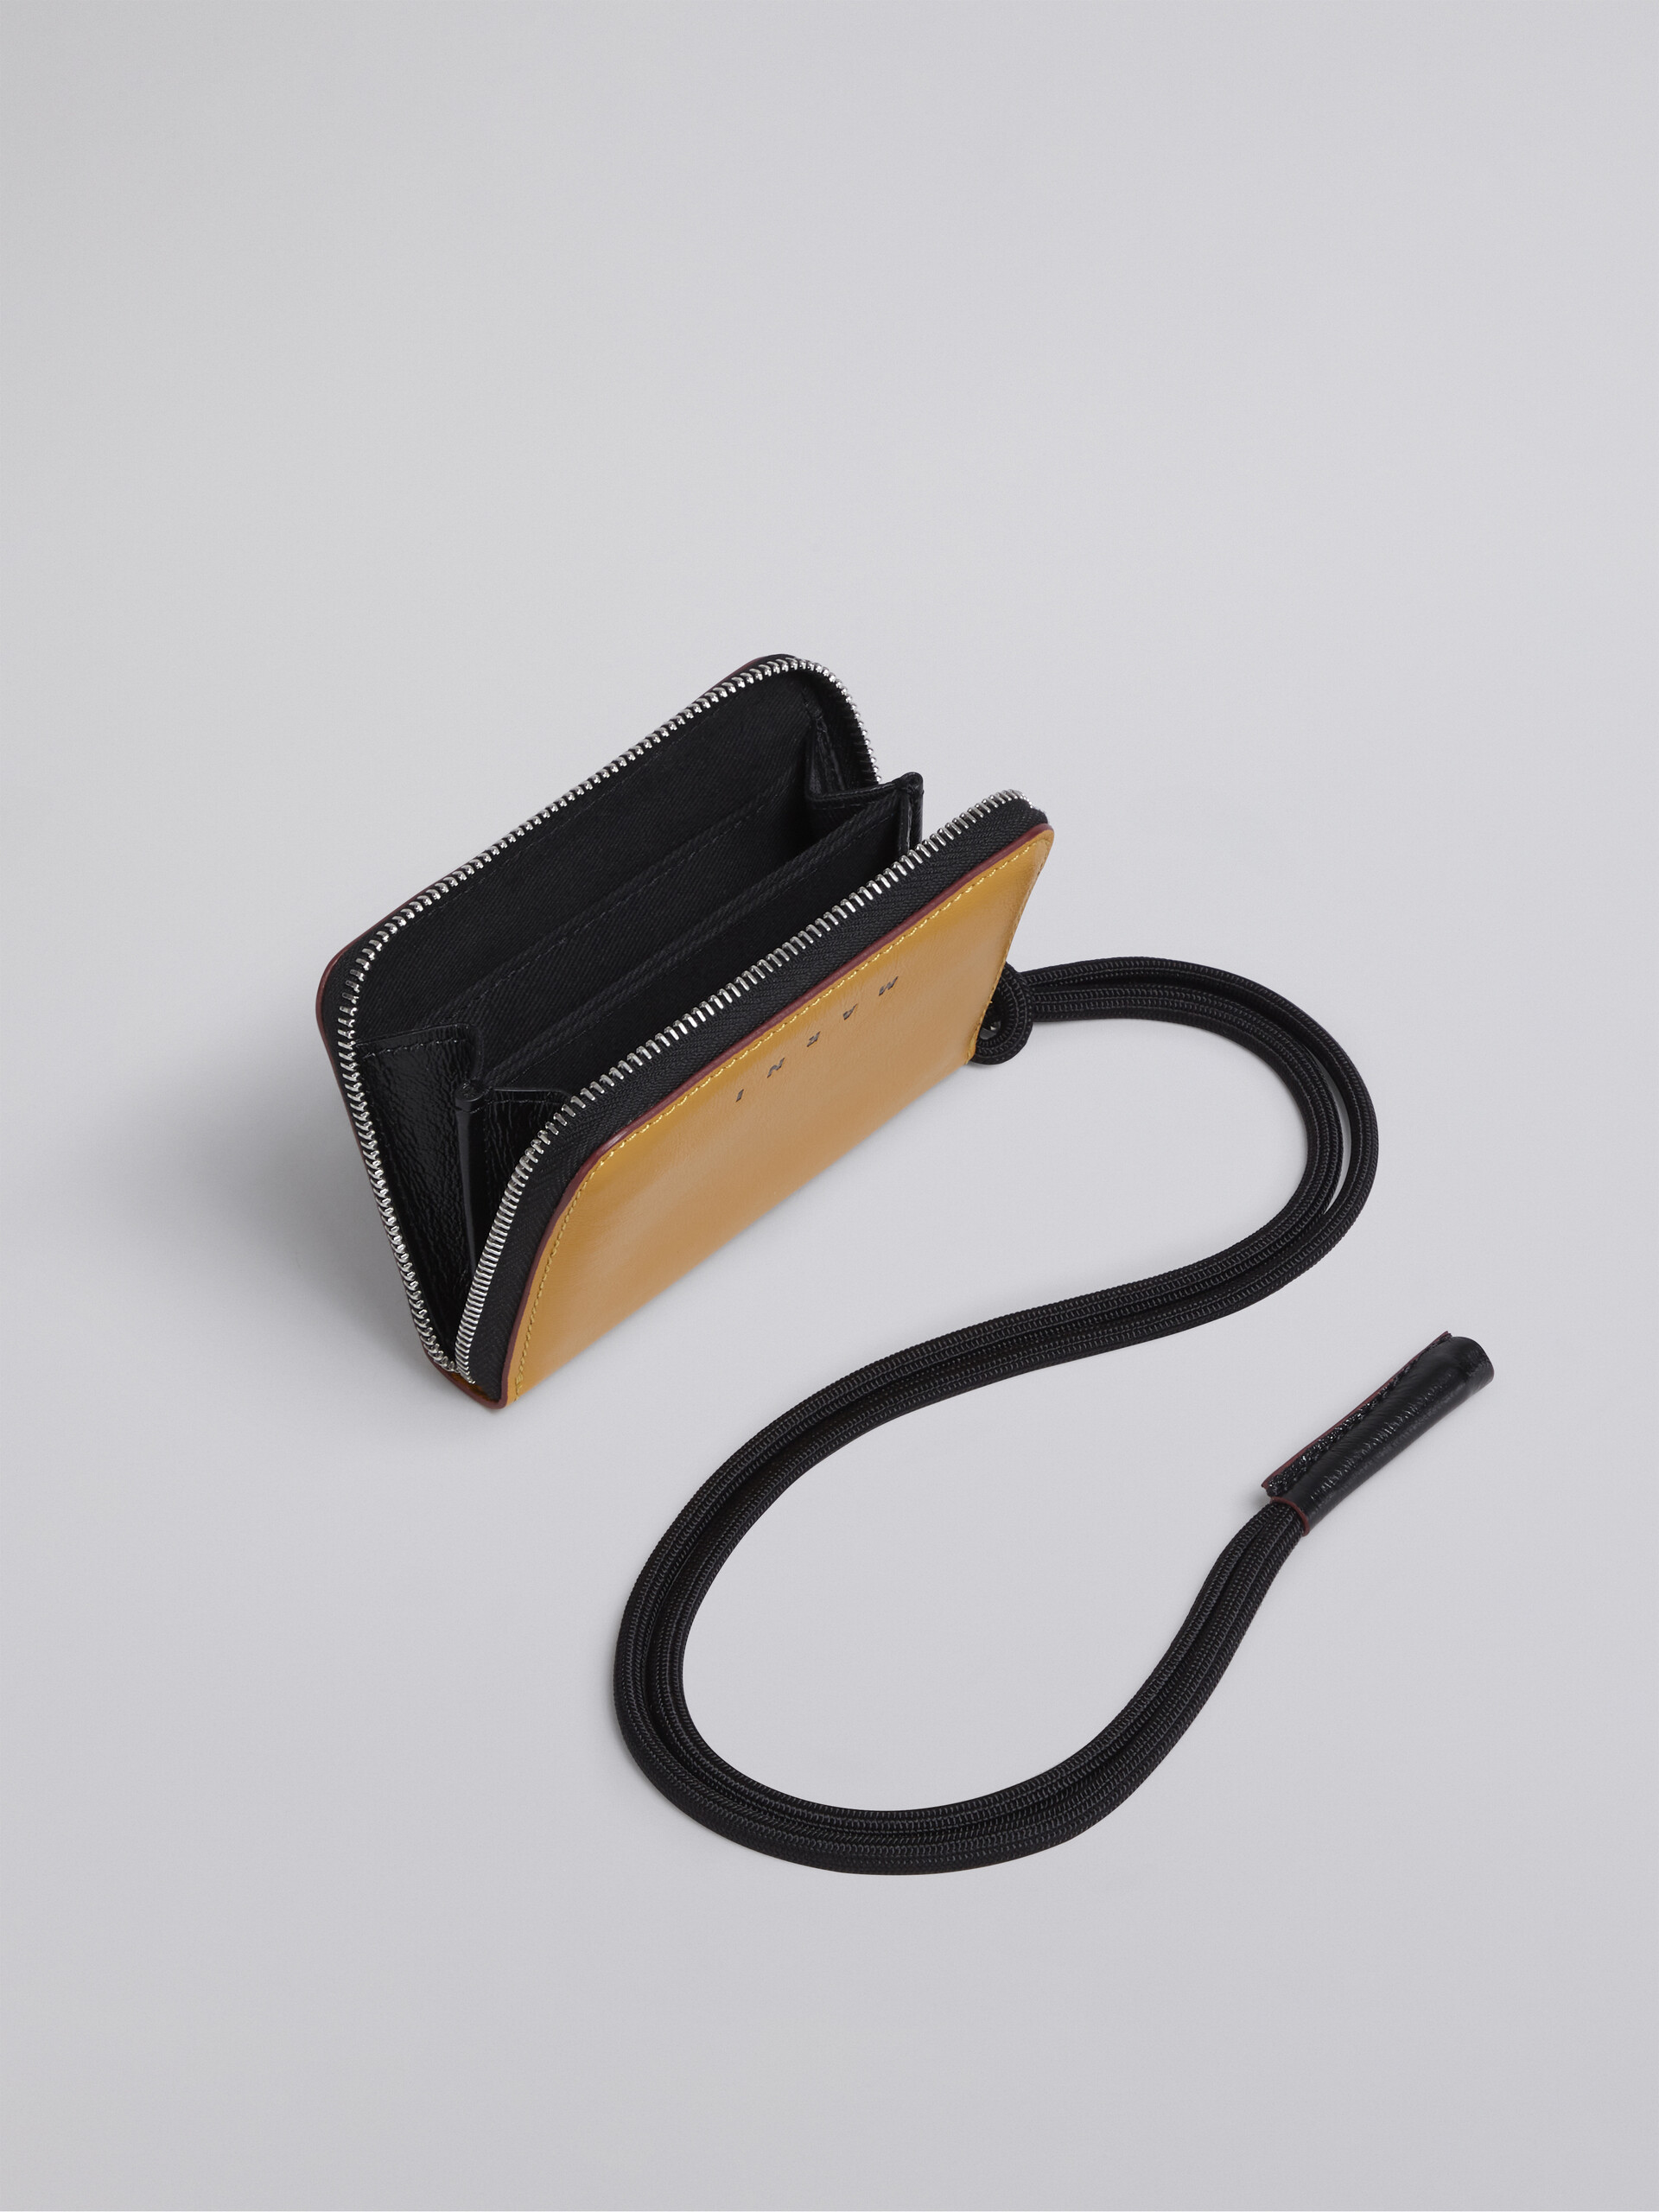 Bi-coloured yellow and black calfskin MUSEO wallet with shoulder strap - Wallets - Image 2